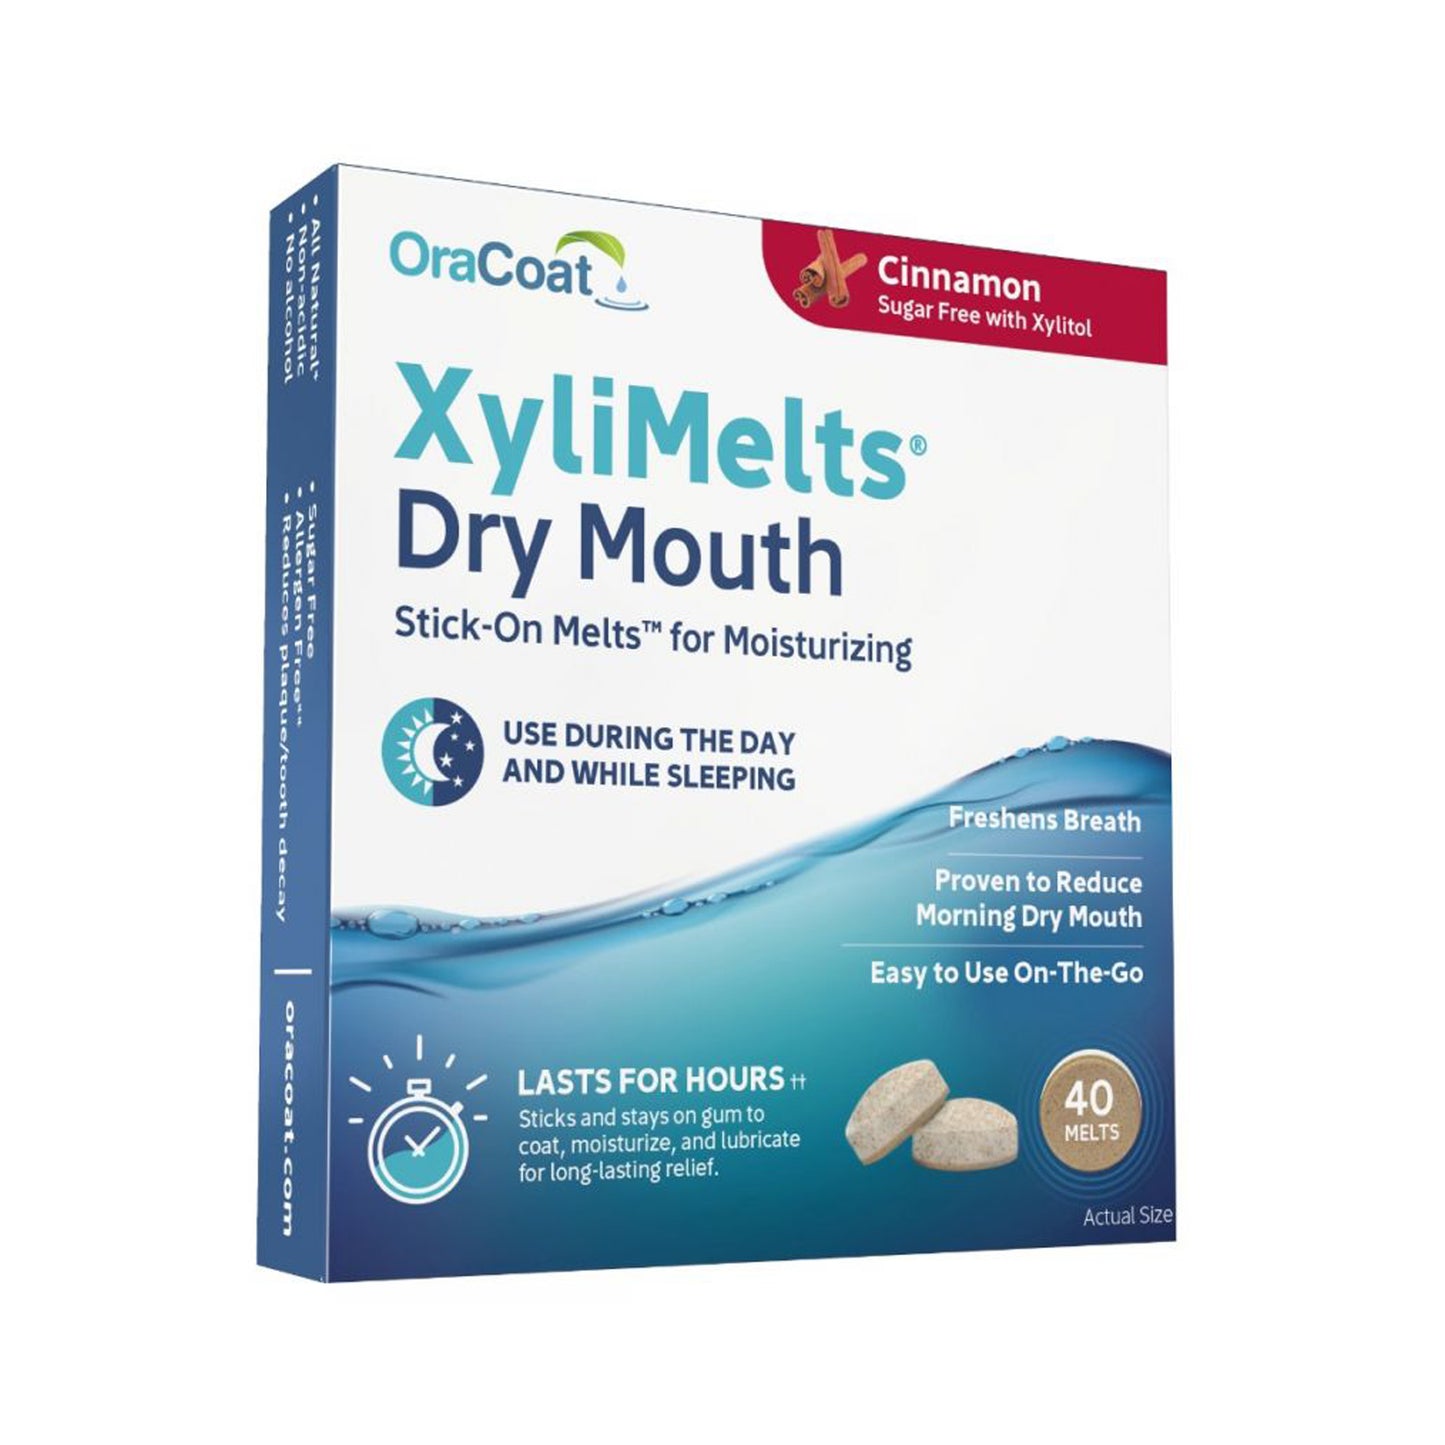 OraCoat XyliMelts for Dry Mouth Cinnamon 40 Melts